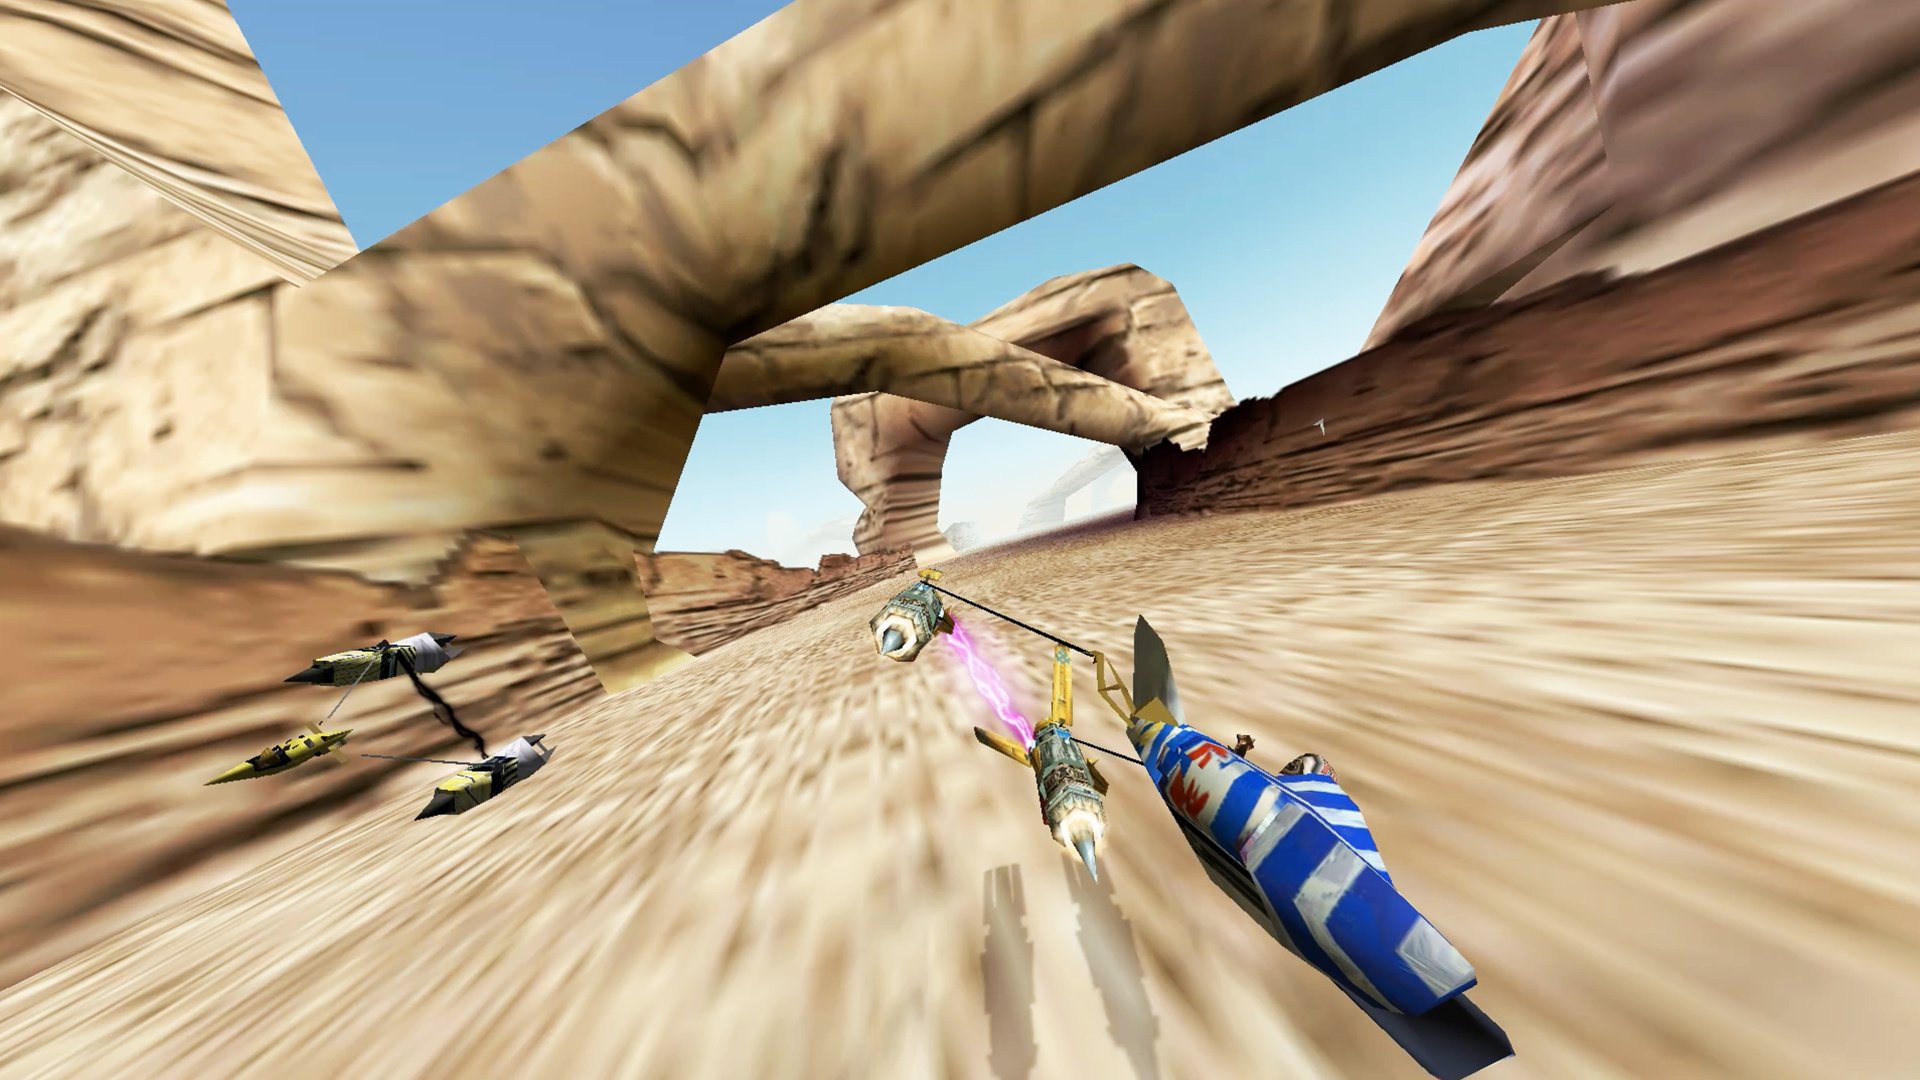 star-wars-episode-i-racer-review-ps4-push-square